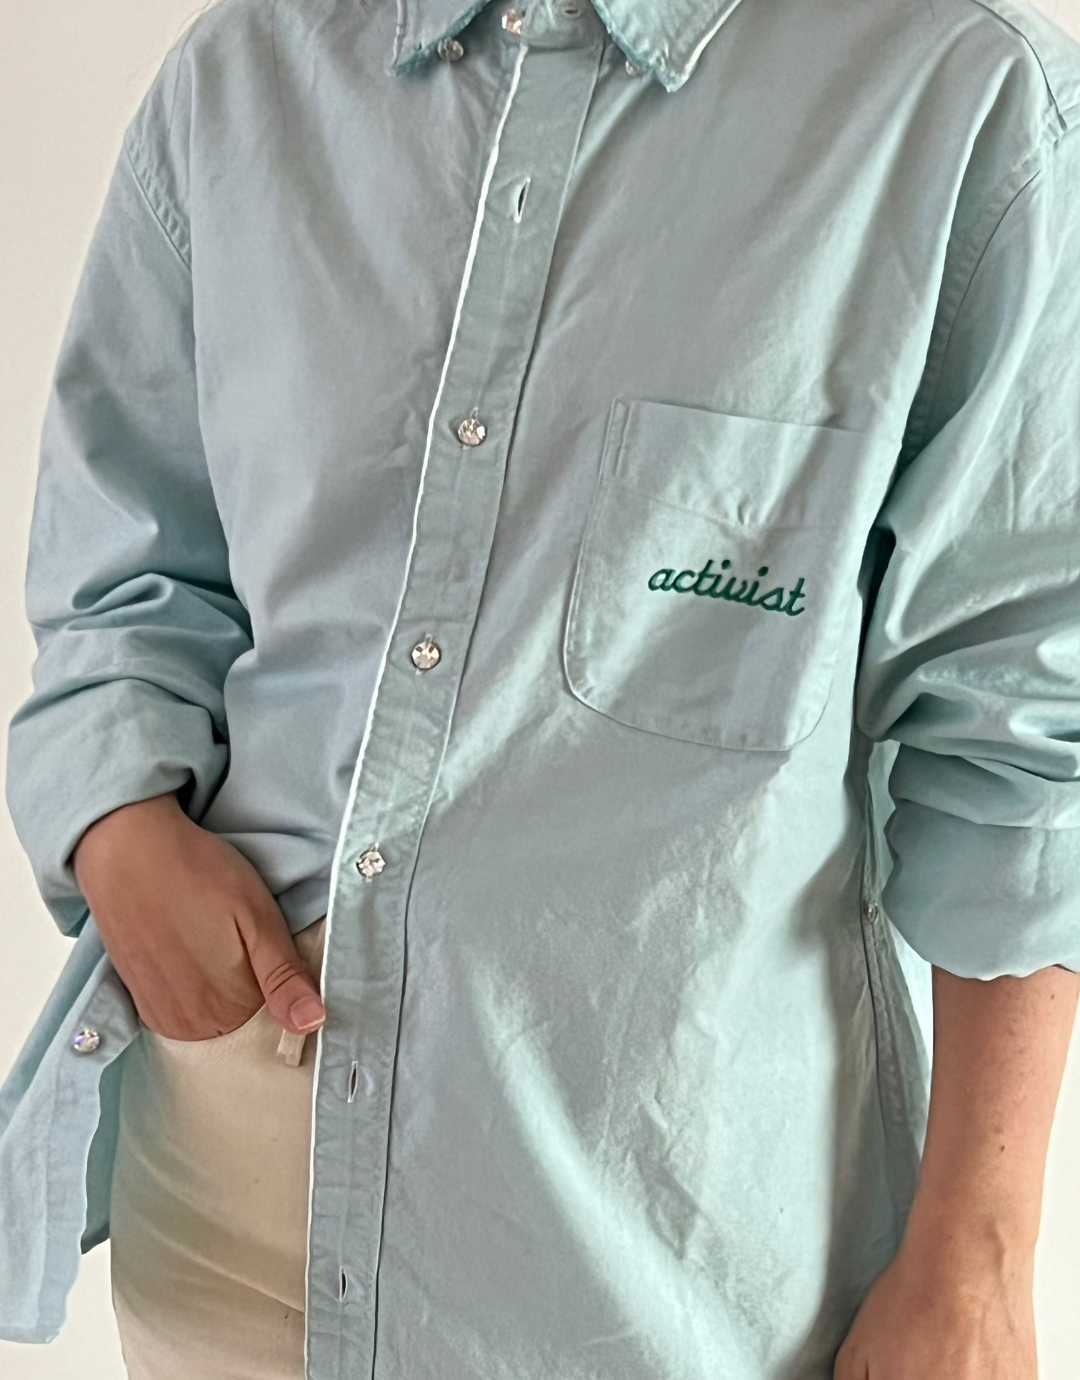 Activist Mint Upcycled Embroidered Shirt